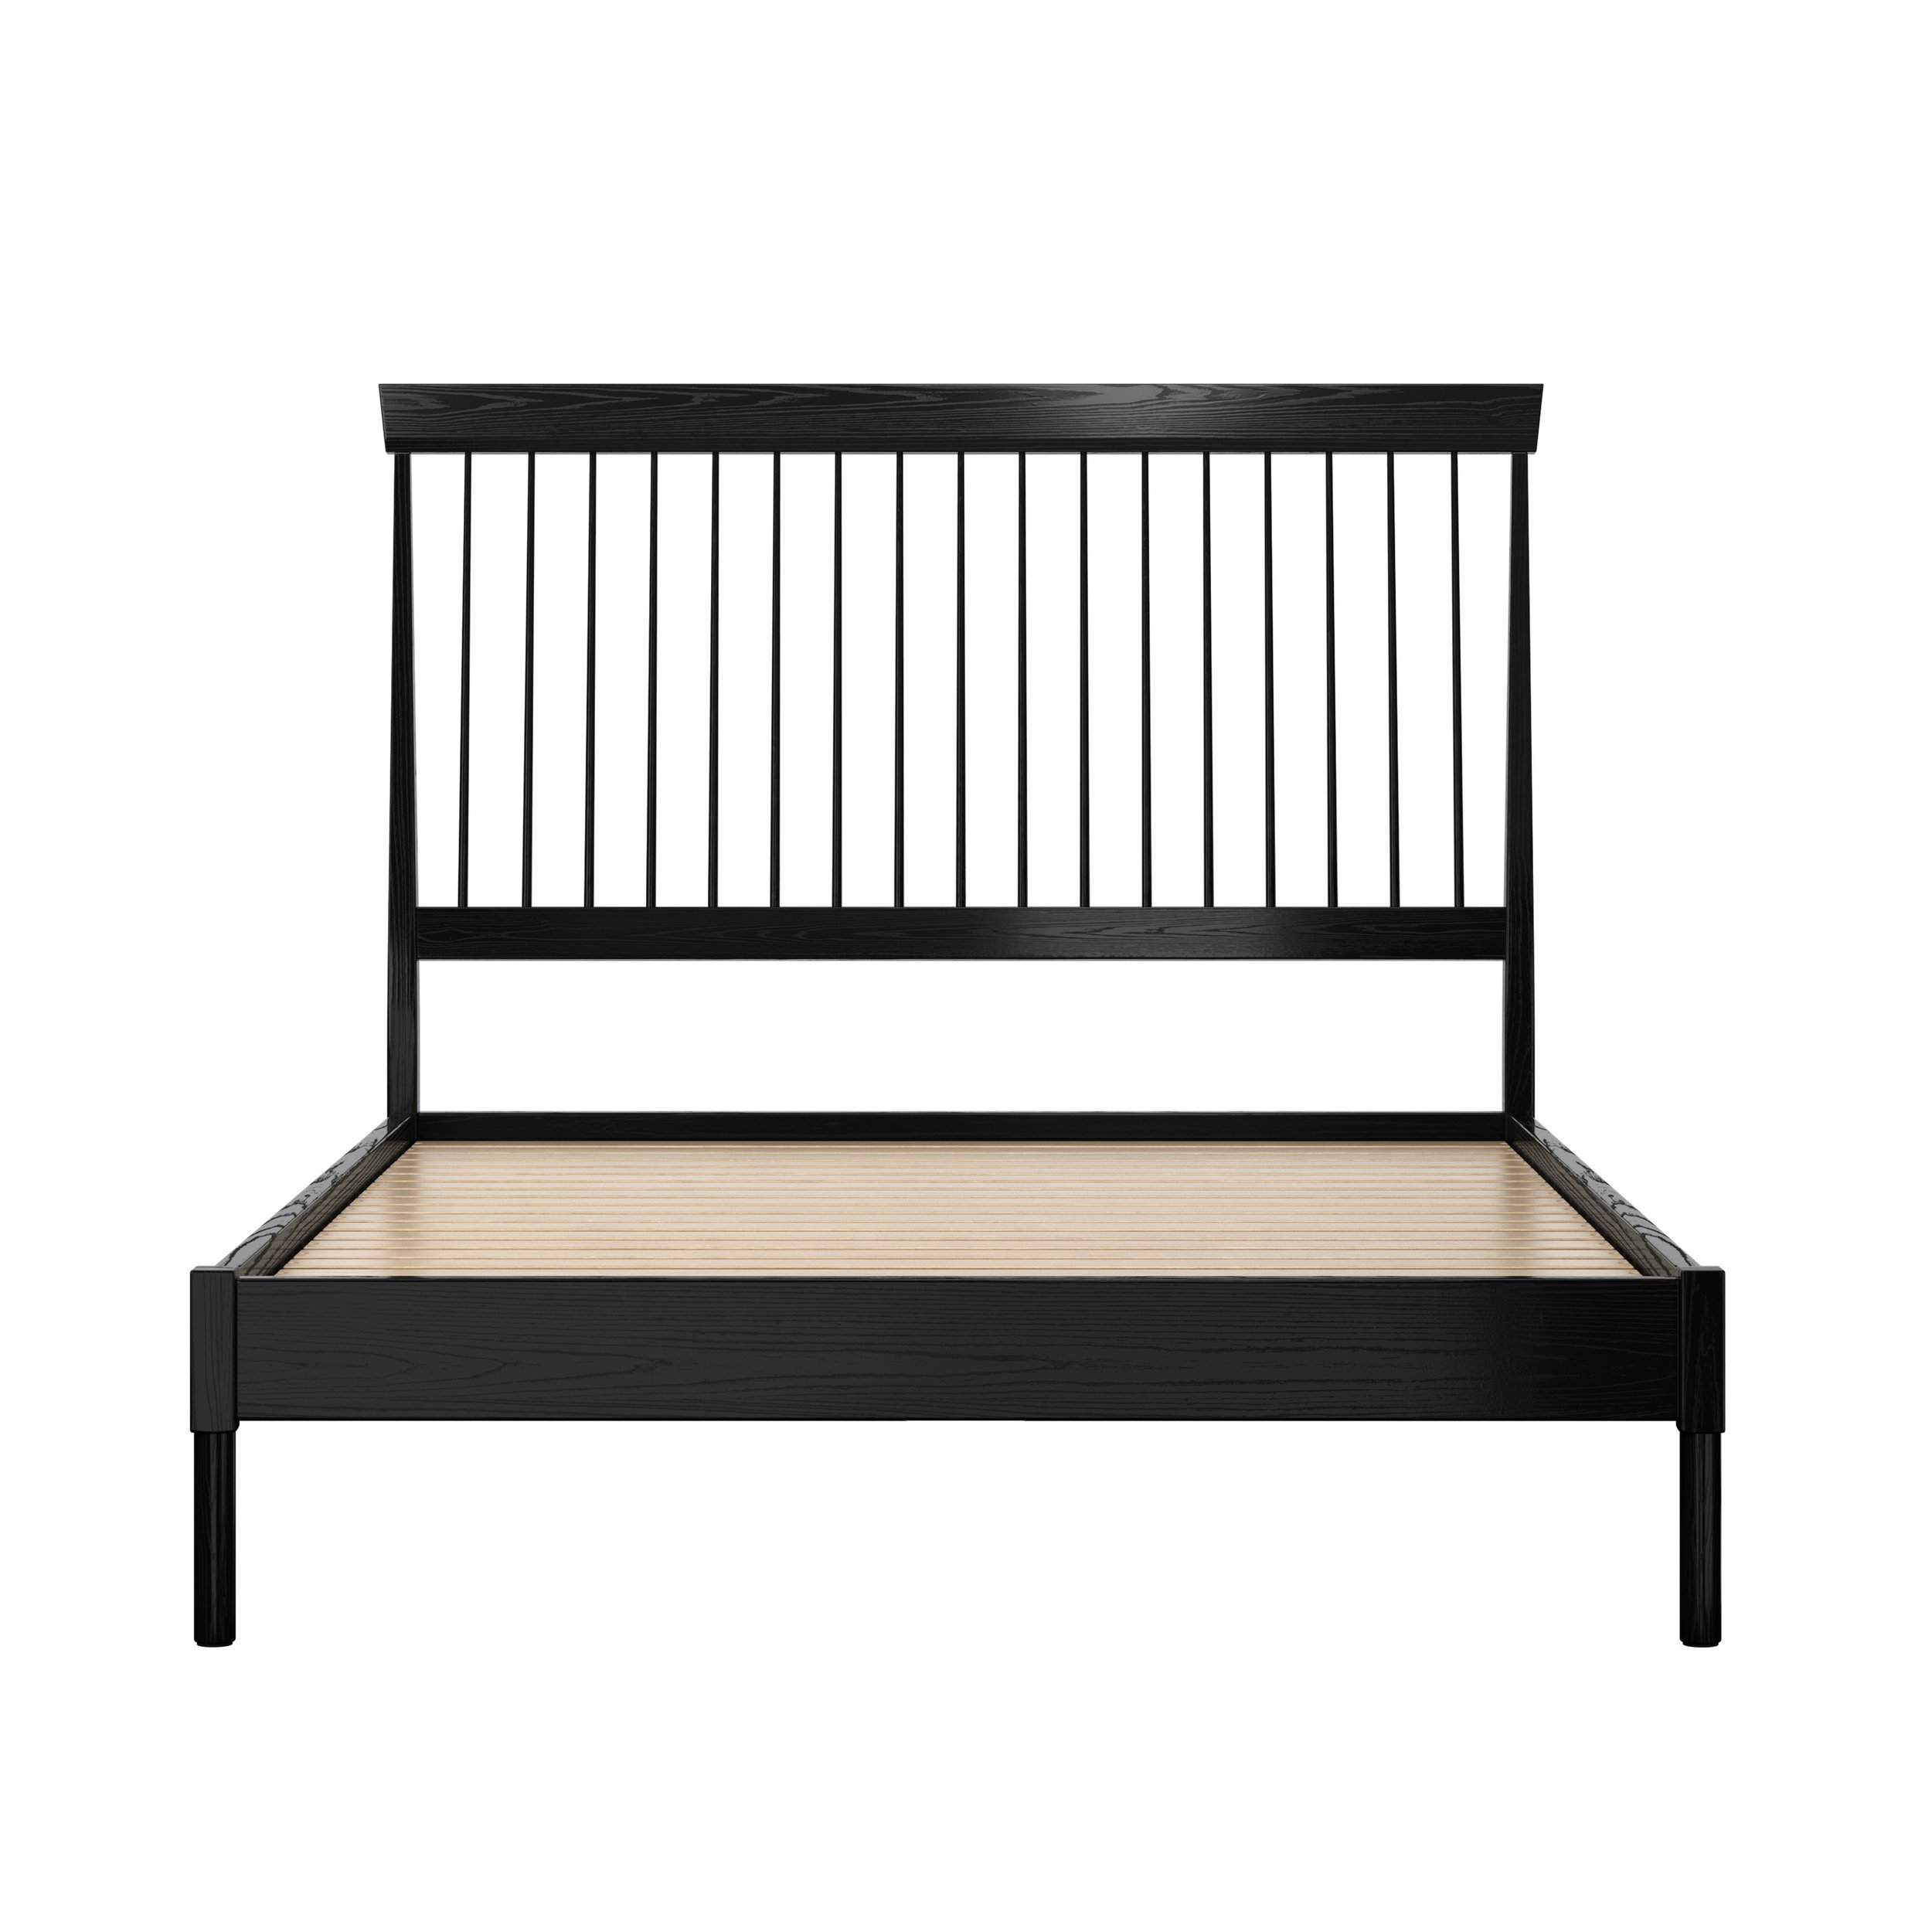 COLT BED - FROM $6,691